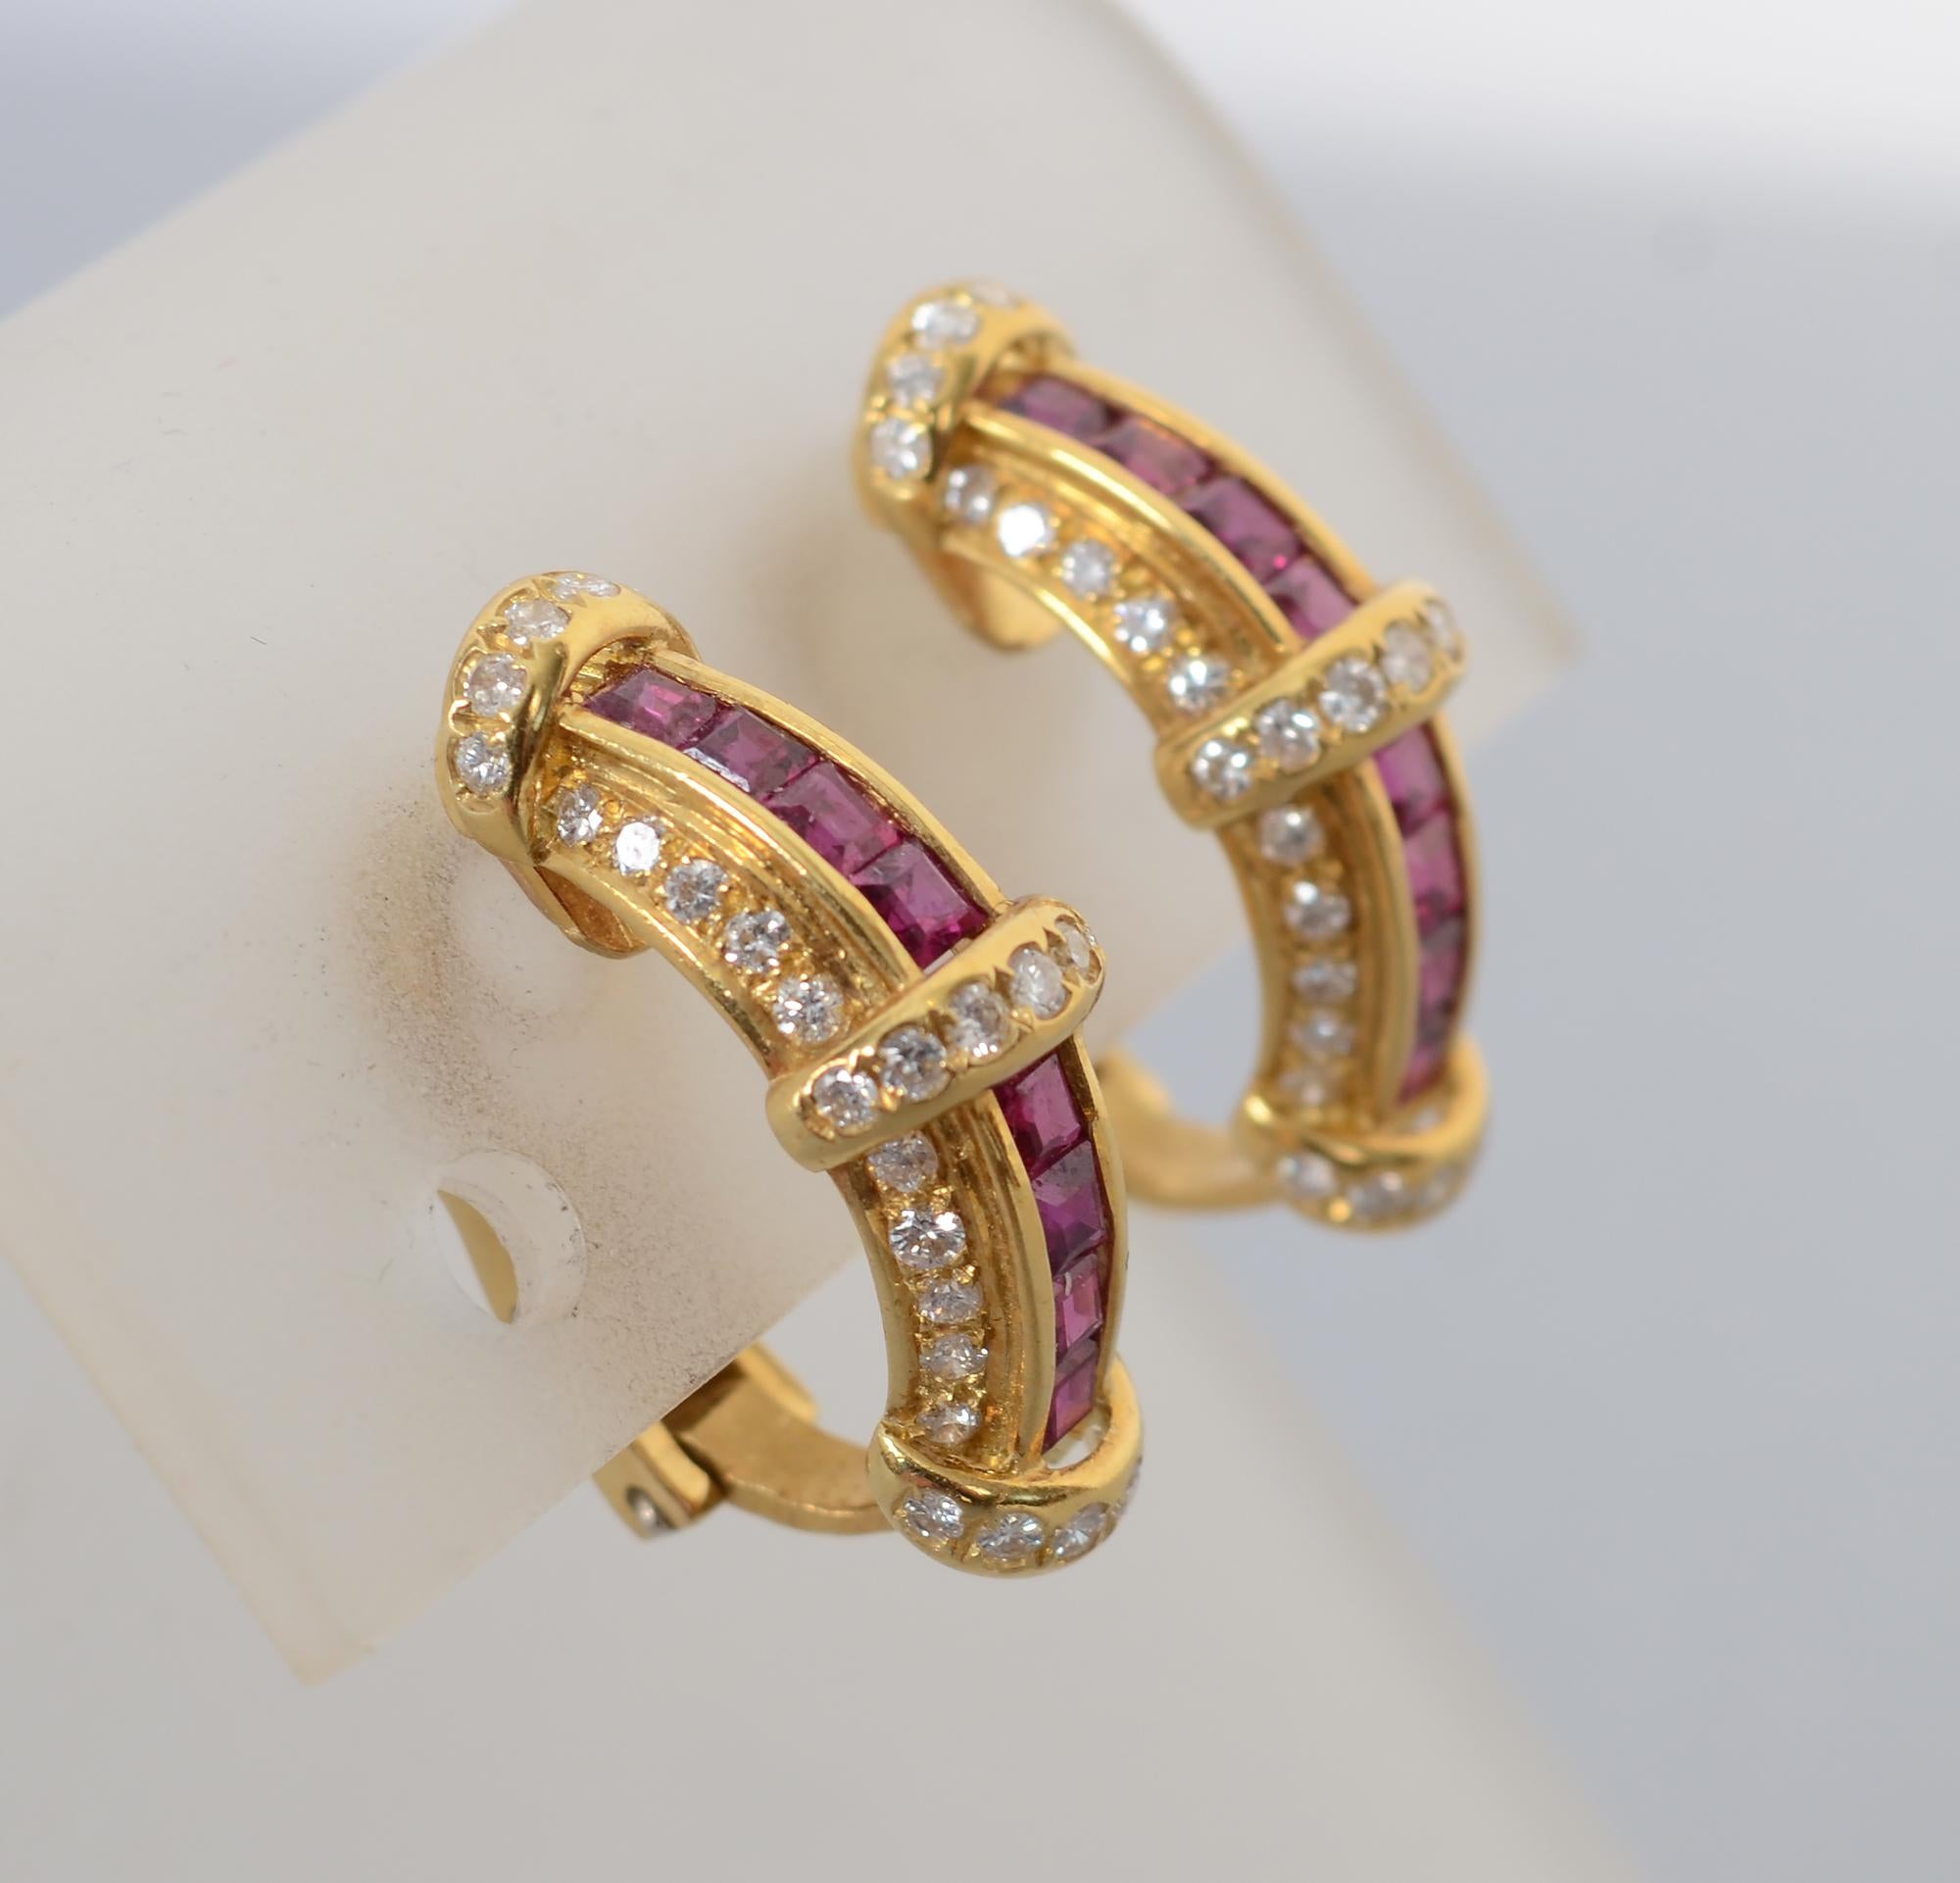 Beautiful half hoop earrings of calibre cut rubies flanked by round diamonds. The rubies are from Burma. The diamonds are H color; VS quality. The earrings have clip backs that can be modified to posts. They are half an inch wide and 15/16